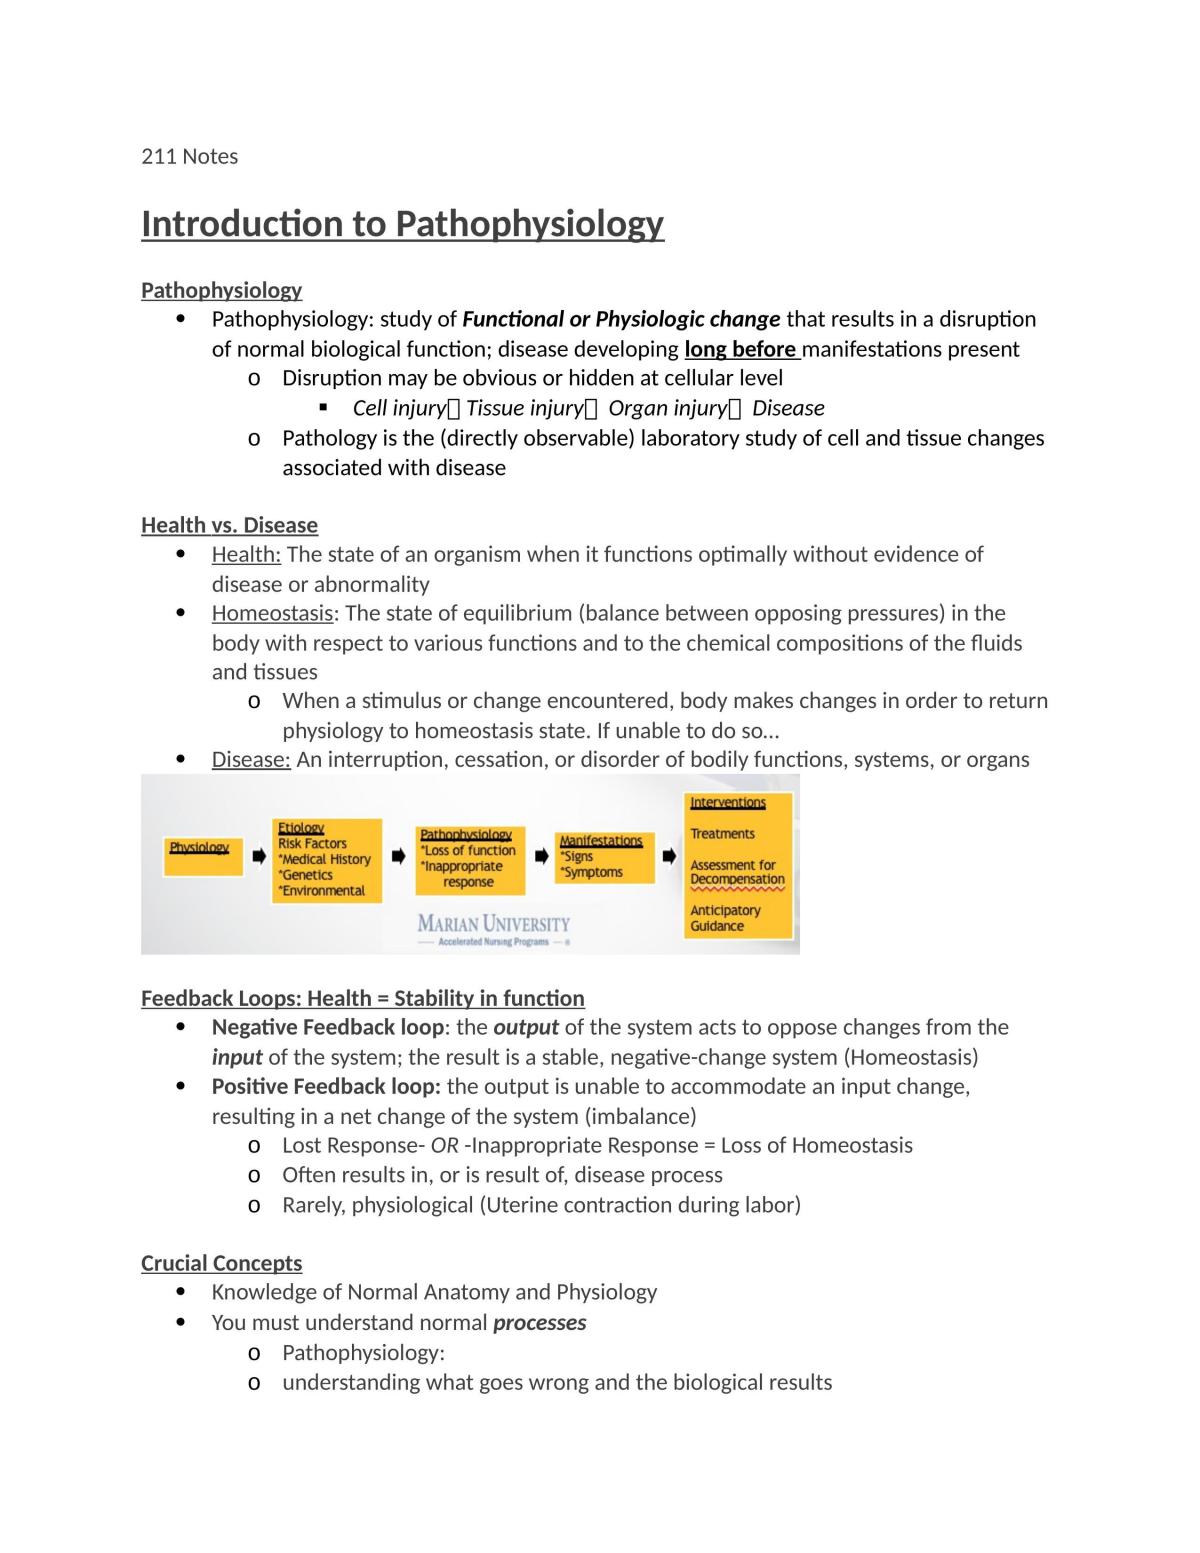 Introduction to Pathophysiology Notes - Page 1